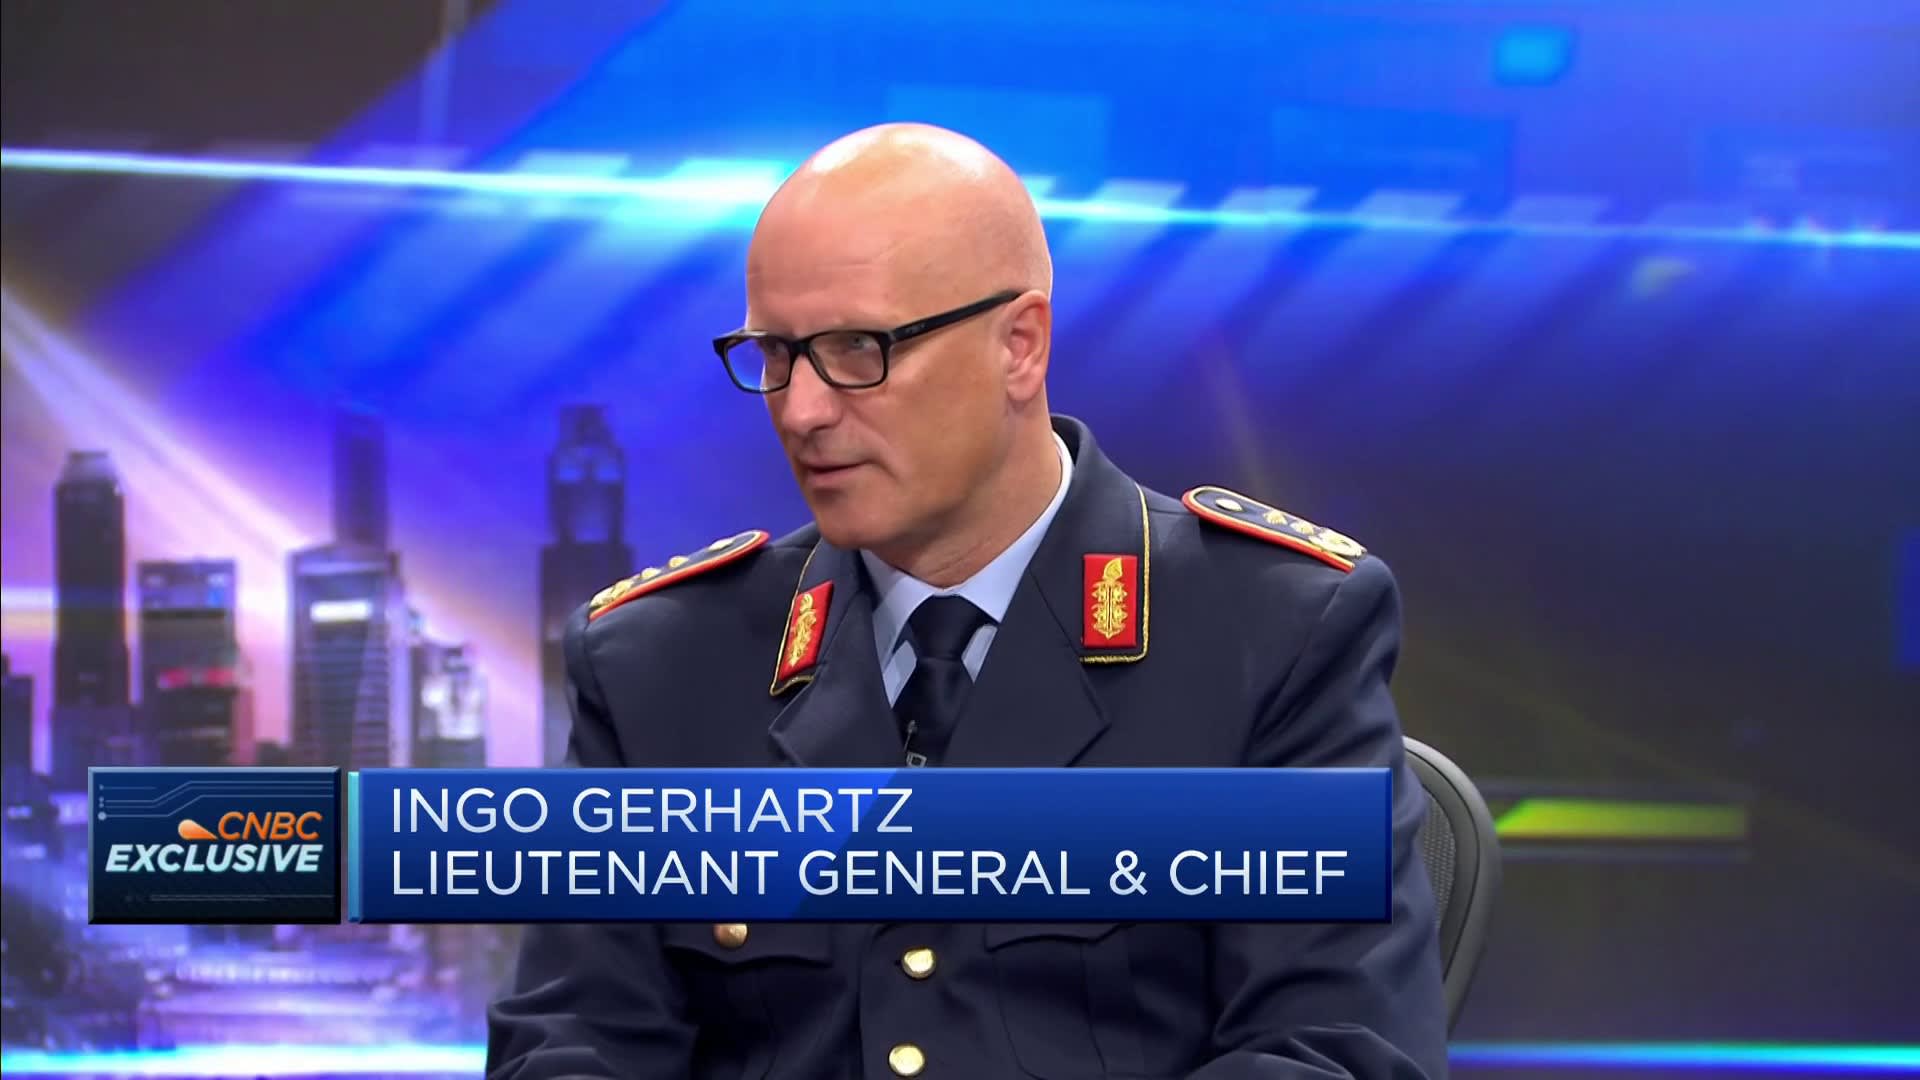 Ingo Gerhartz discusses Germany's joint exercises in Indo-Pacific